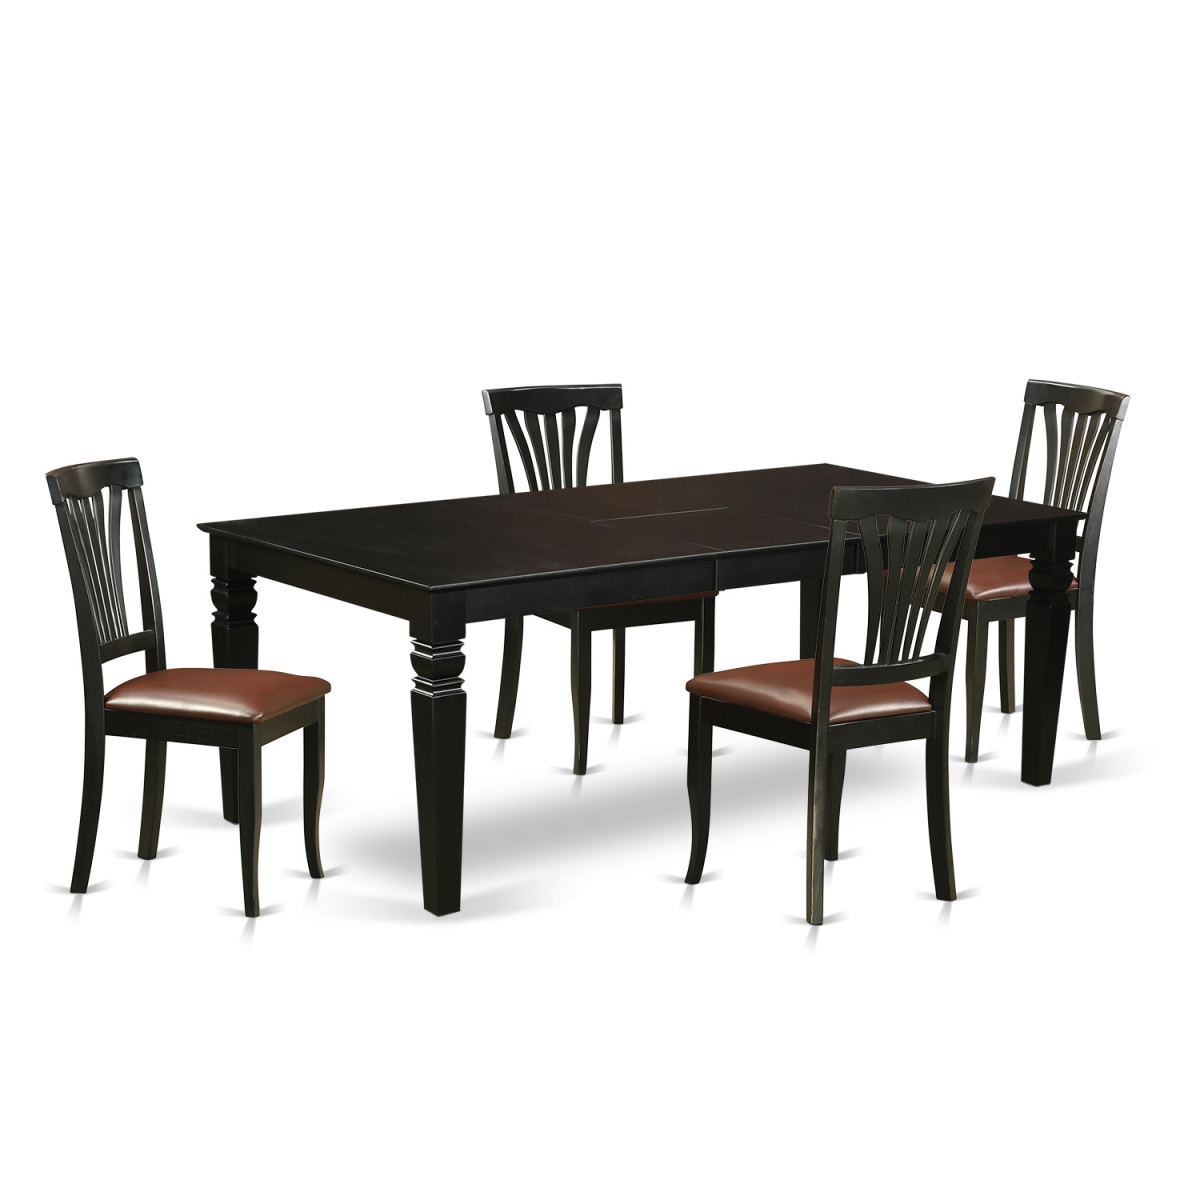 Dinette Set With A Single Logan Kitchen Table & Four Faux Leather Upholstery Seat Chairs, Luxurious Black - 5 Piece